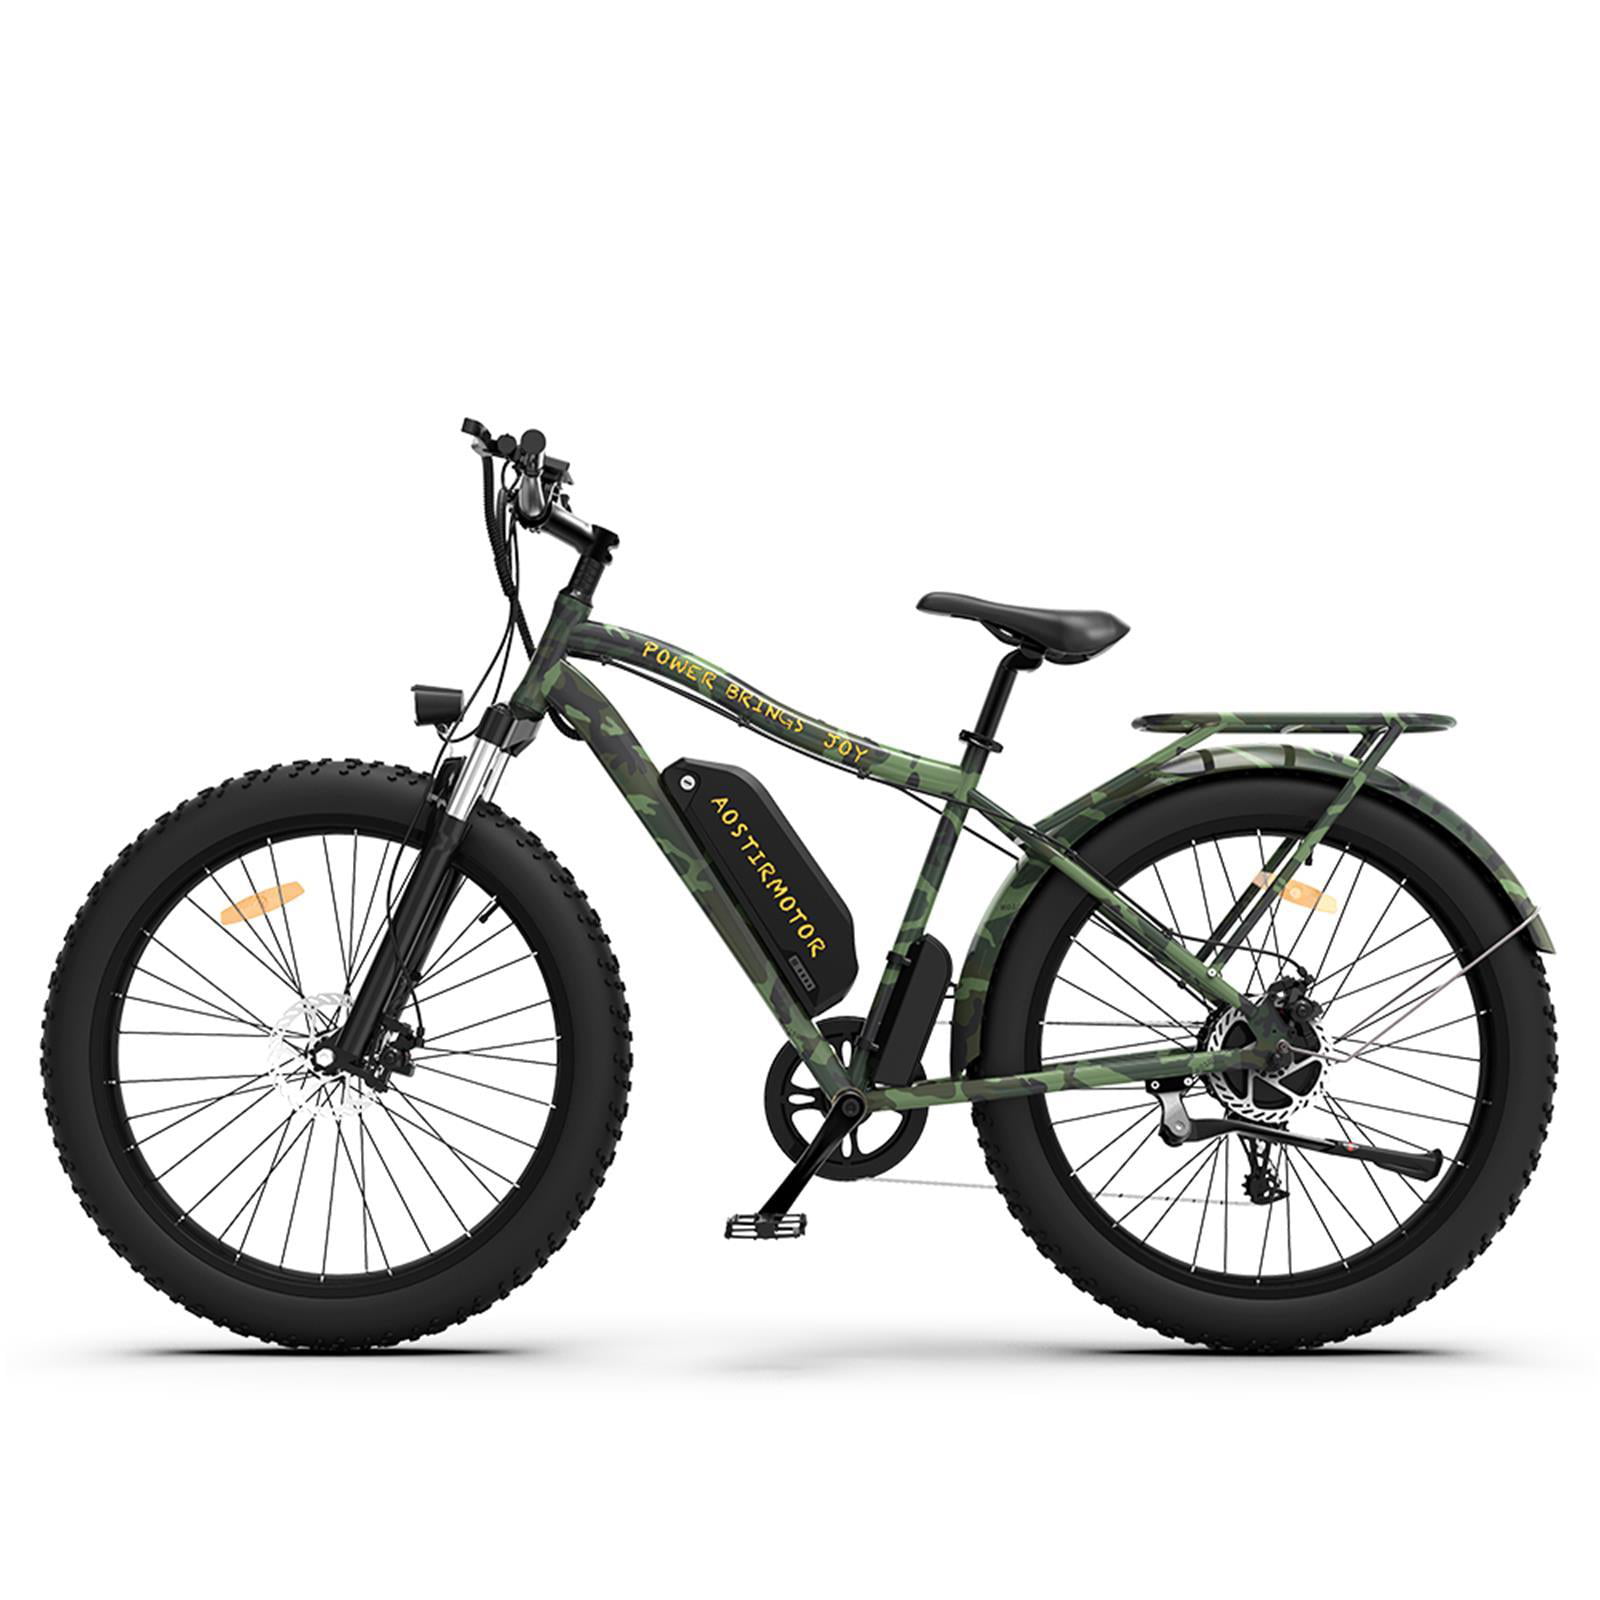 48V 13Ah Removable Battery Suspension Fork and 7 Speed Gear Electric Bike 26 4.0 Fat Tire Ebike 750W Powerful Motor